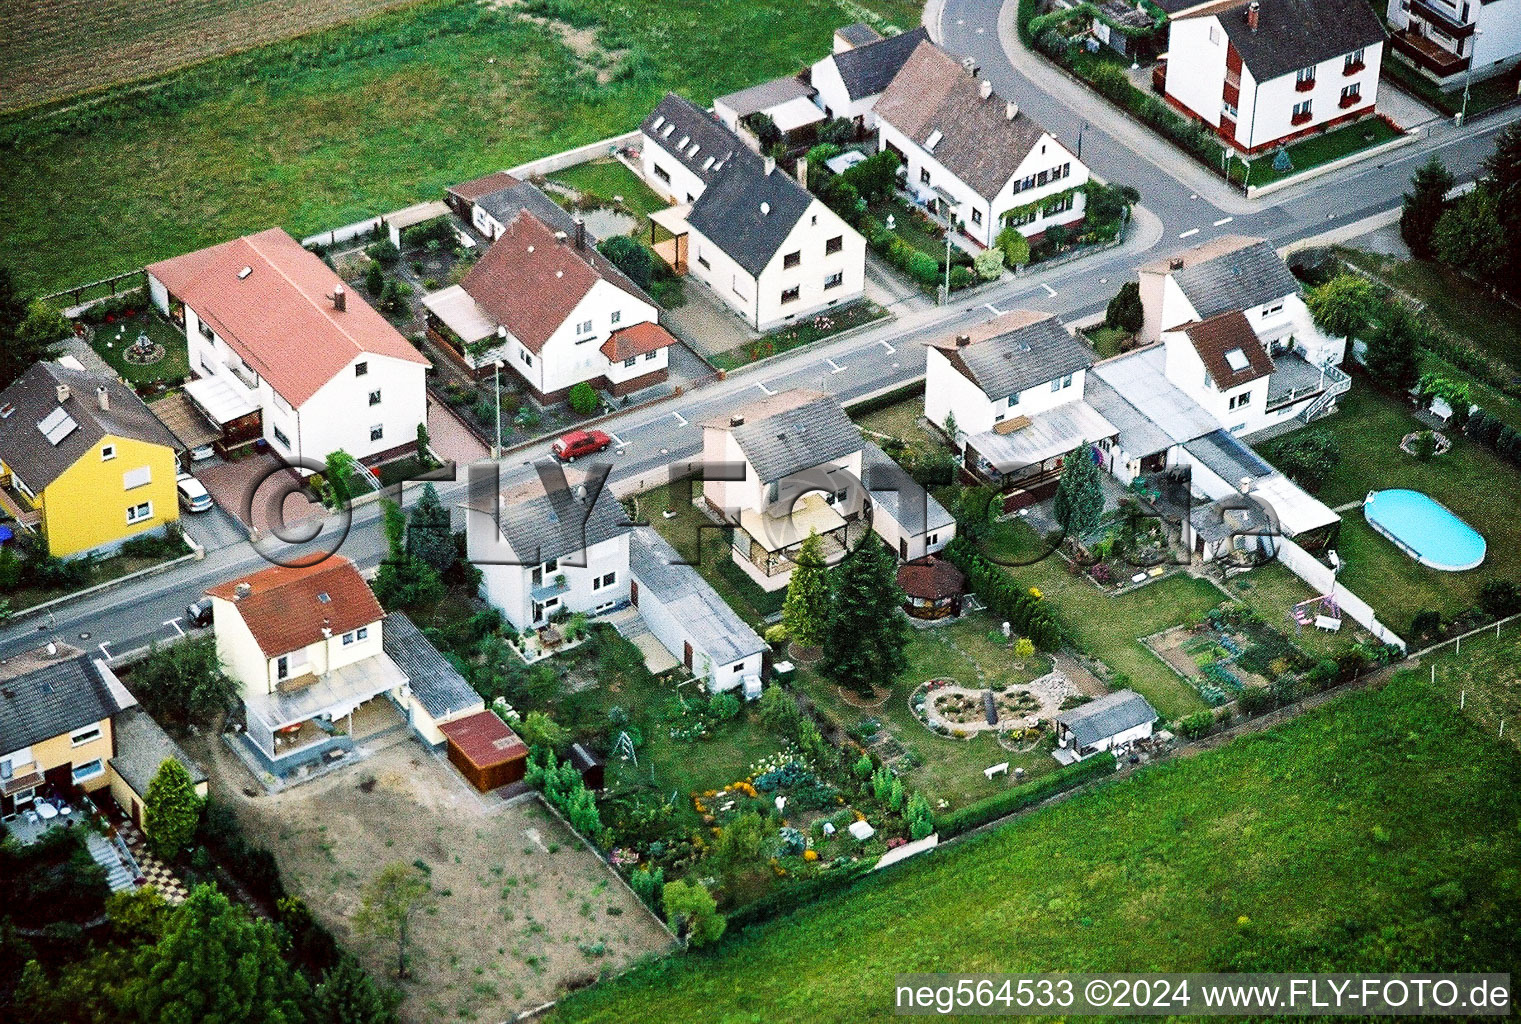 Aerial photograpy of Wattstr in Freckenfeld in the state Rhineland-Palatinate, Germany